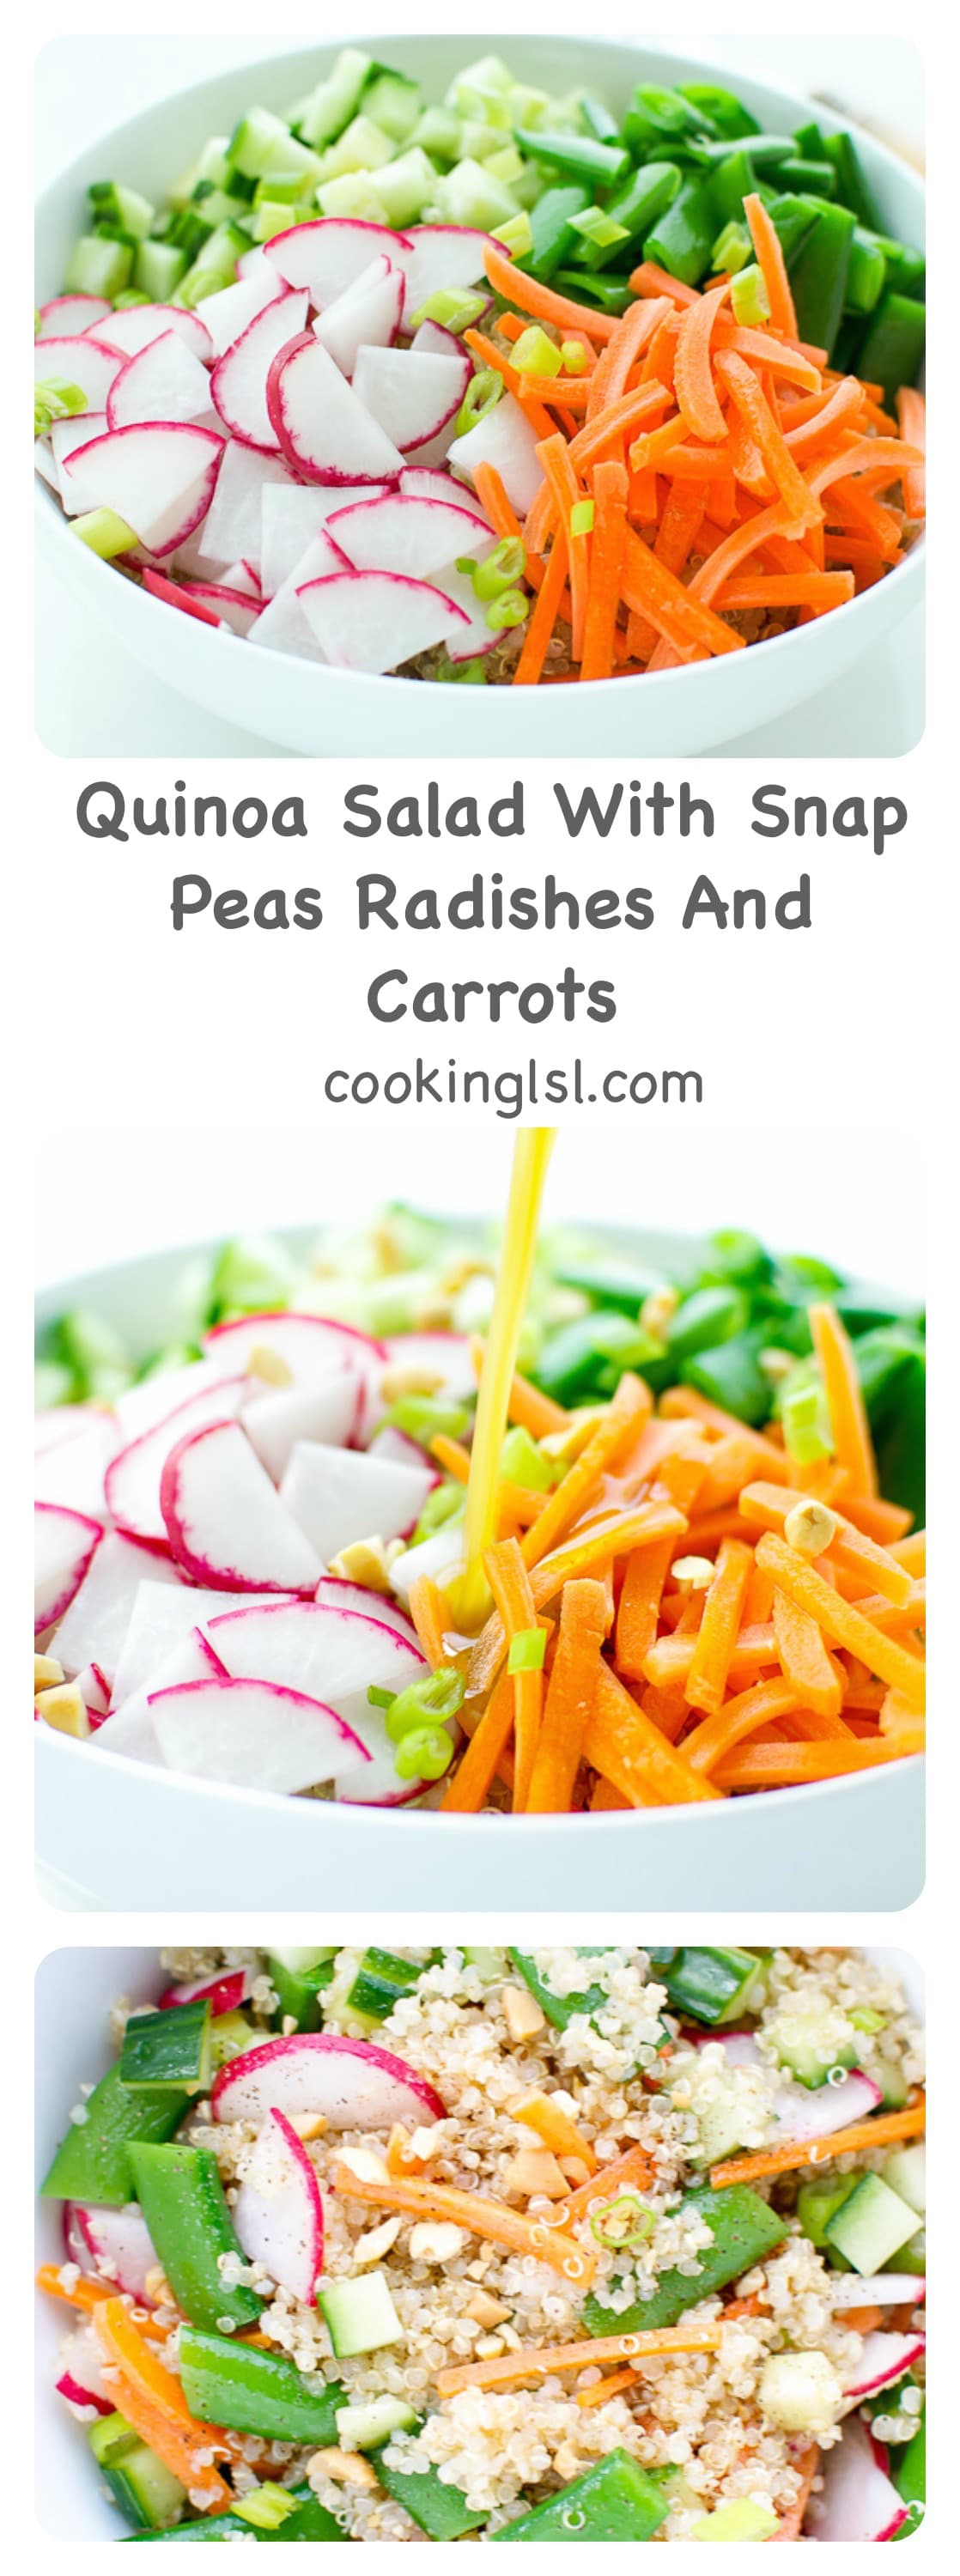 Quinoa-Salad-With-Snap-Peas-Radishes-and-Carrots